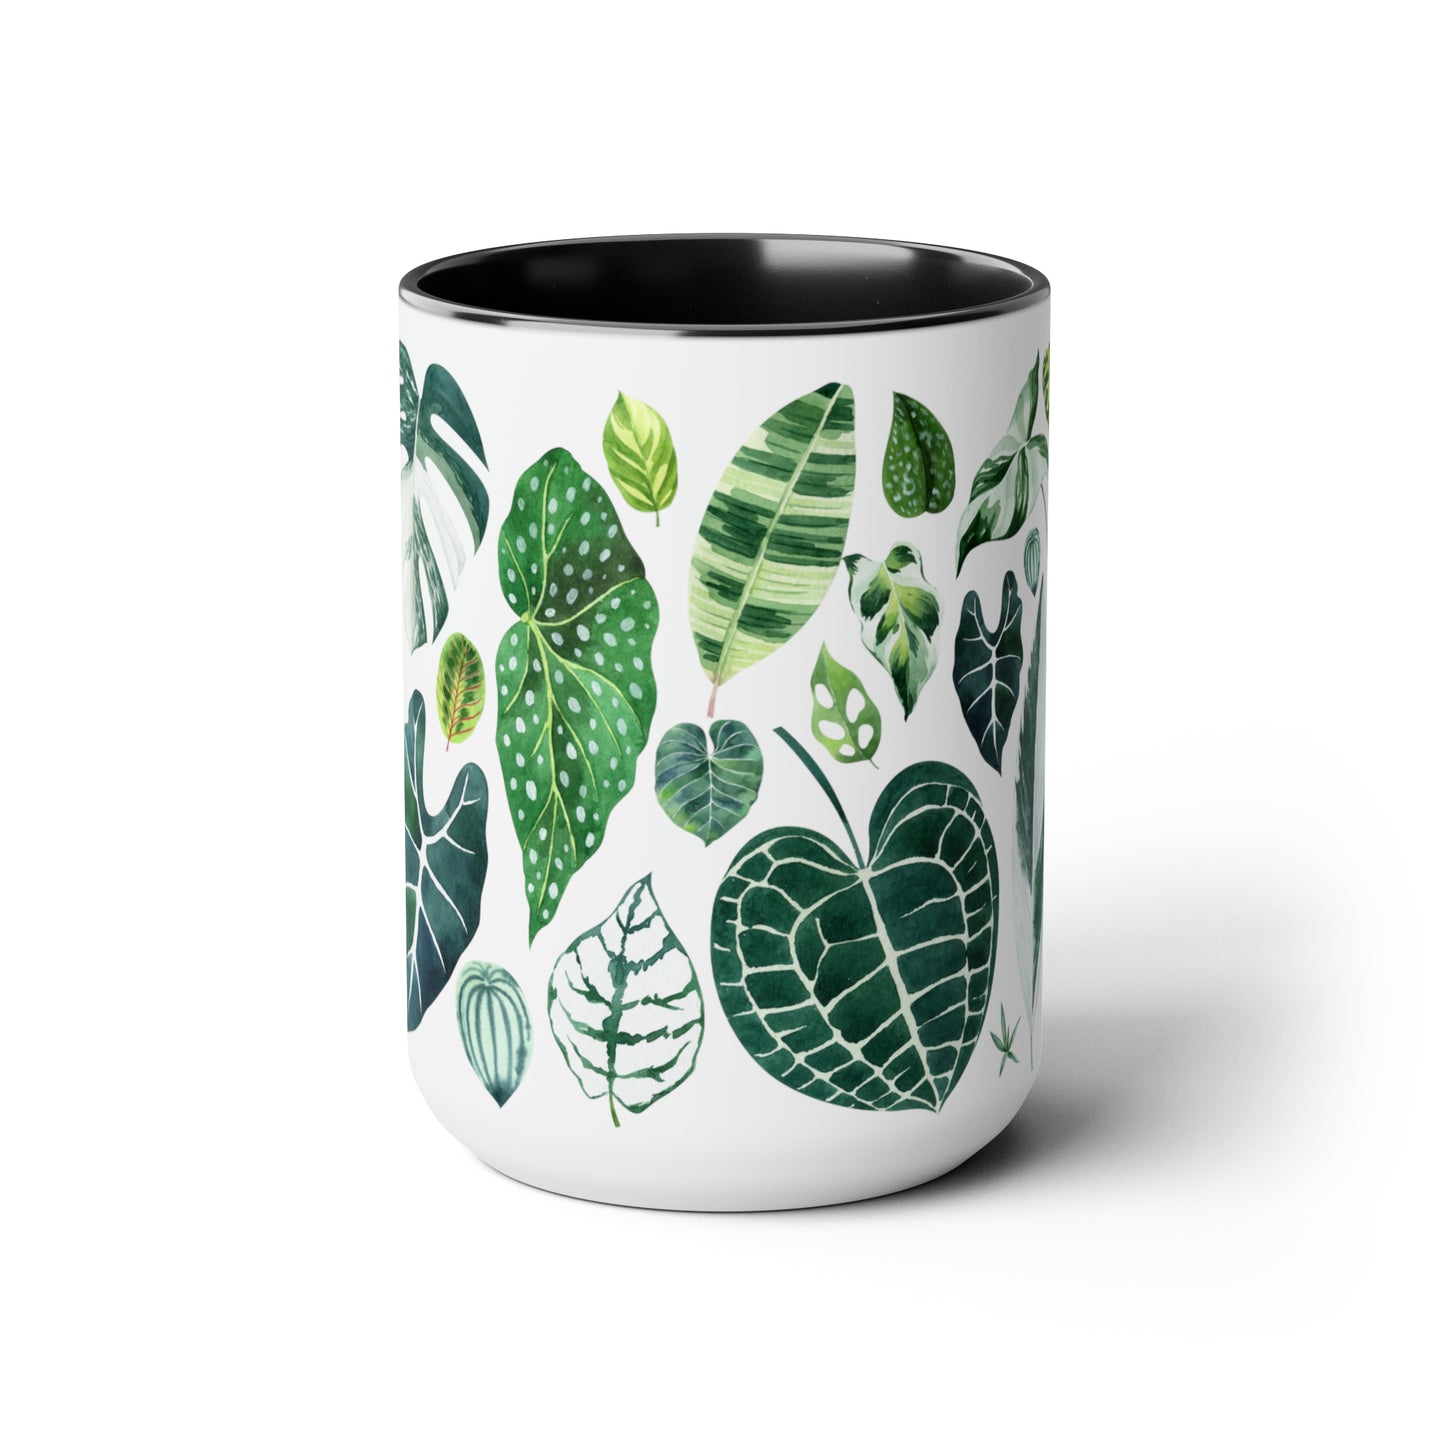 House plants Coffee Mugs, 15oz for plant lady, plant mom, plant daddy or plant lover. Birthday gift for plant lover. Rare plants